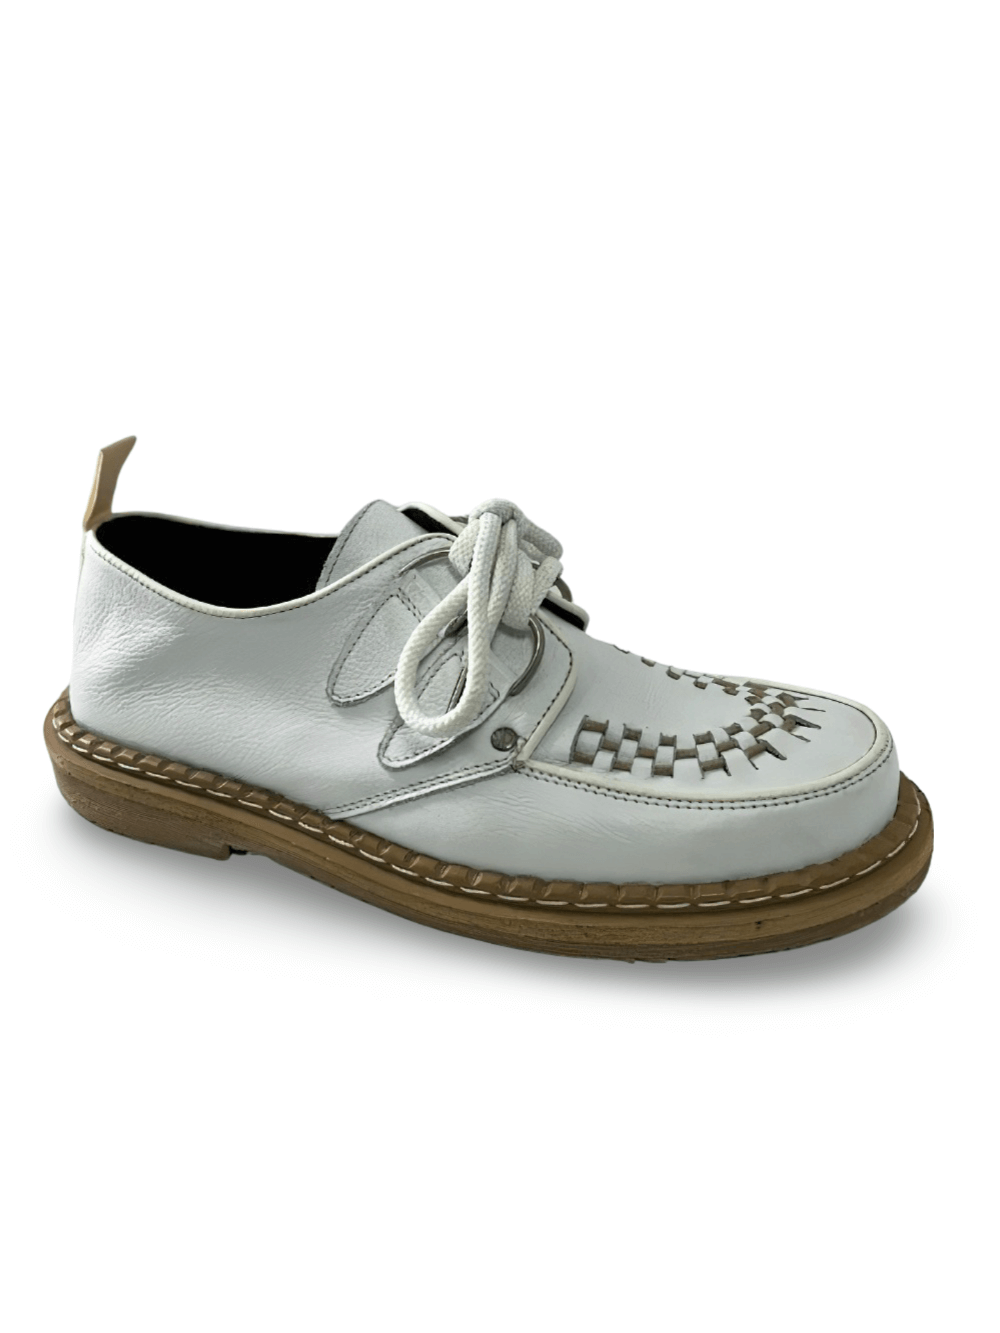 Lace-Up White Leather Creepers in Rockabilly Style